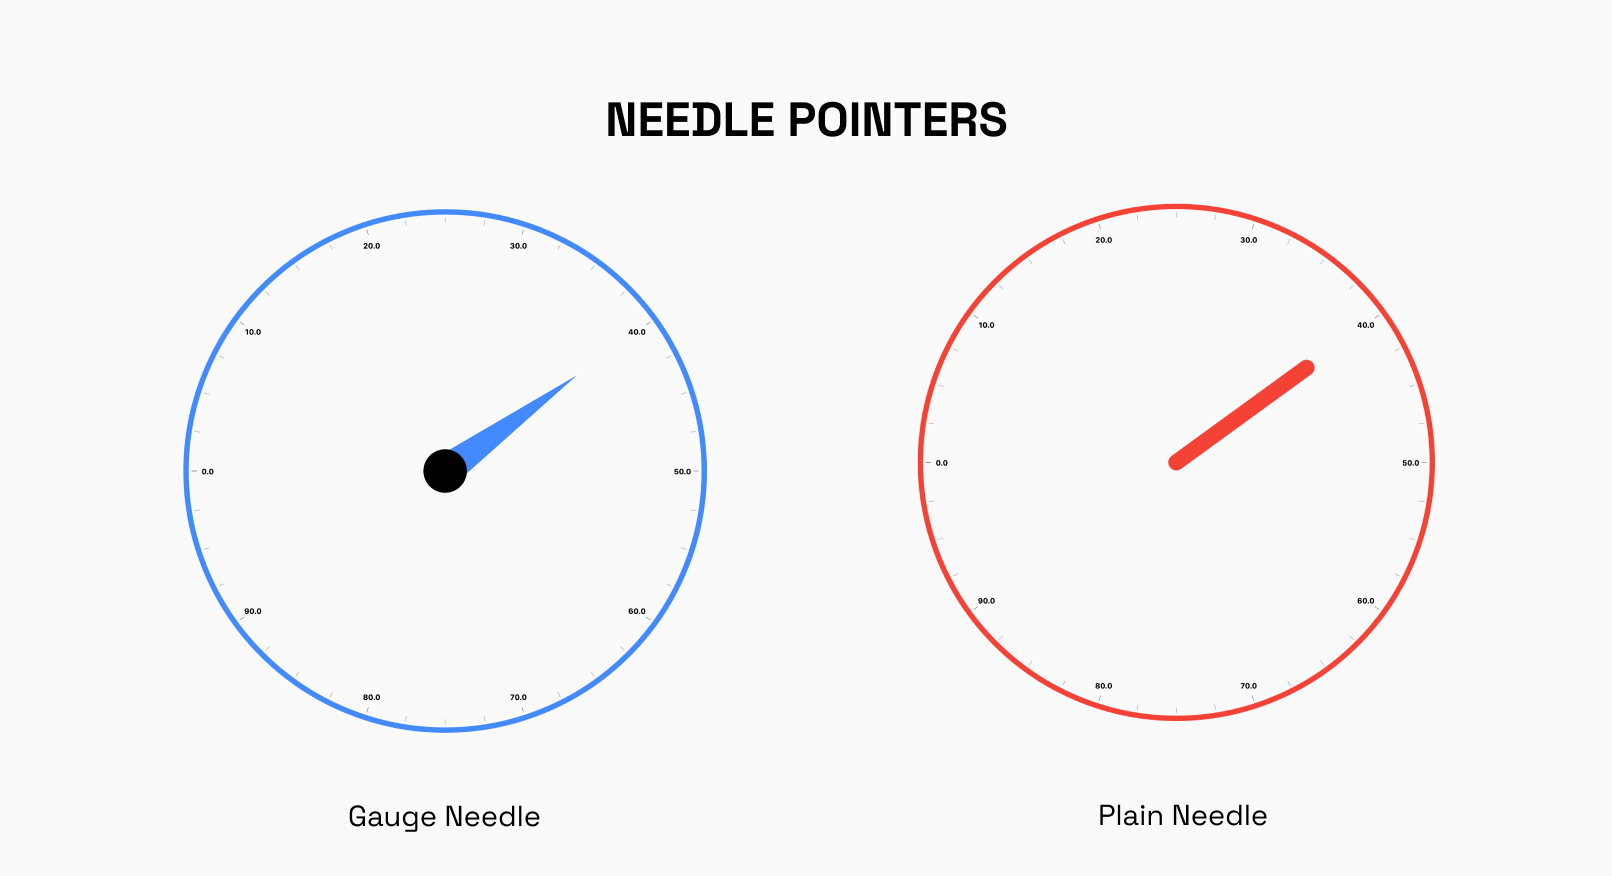 Needle pointers and shape pointers